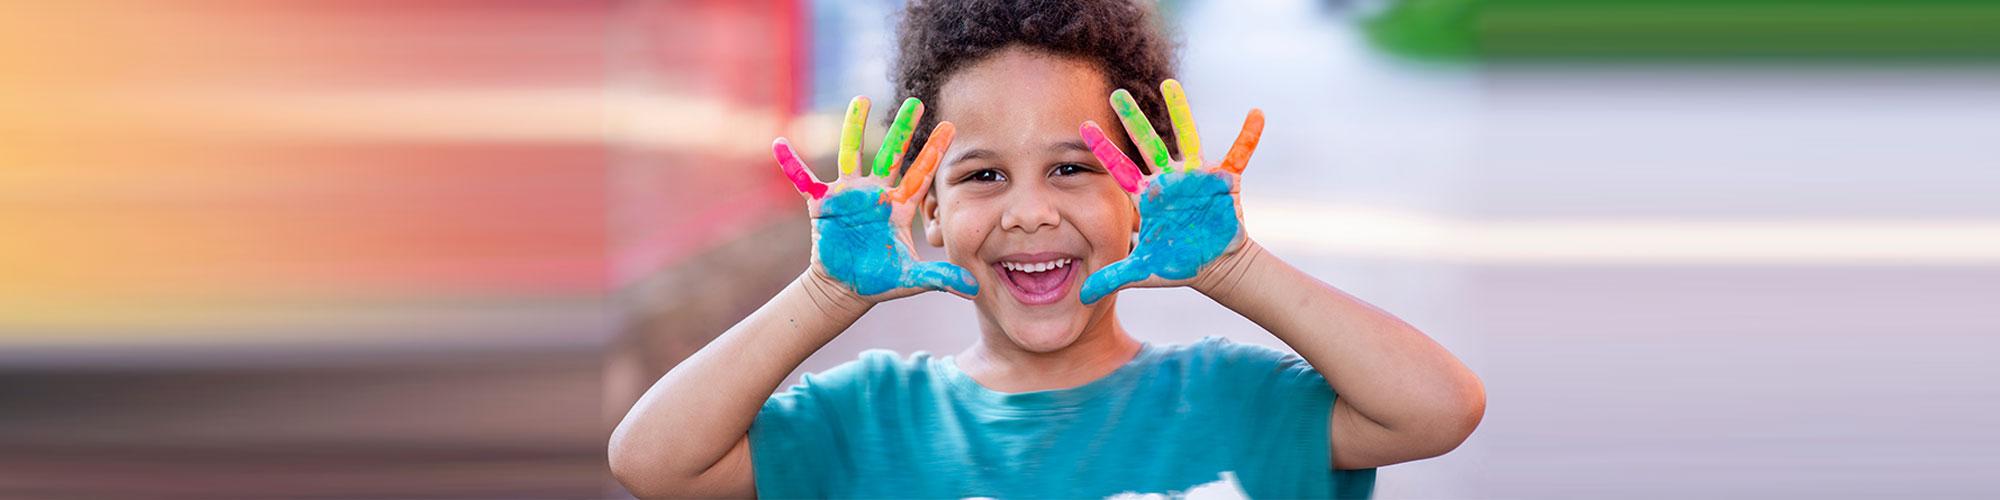 little boy happy with paint on his hands 